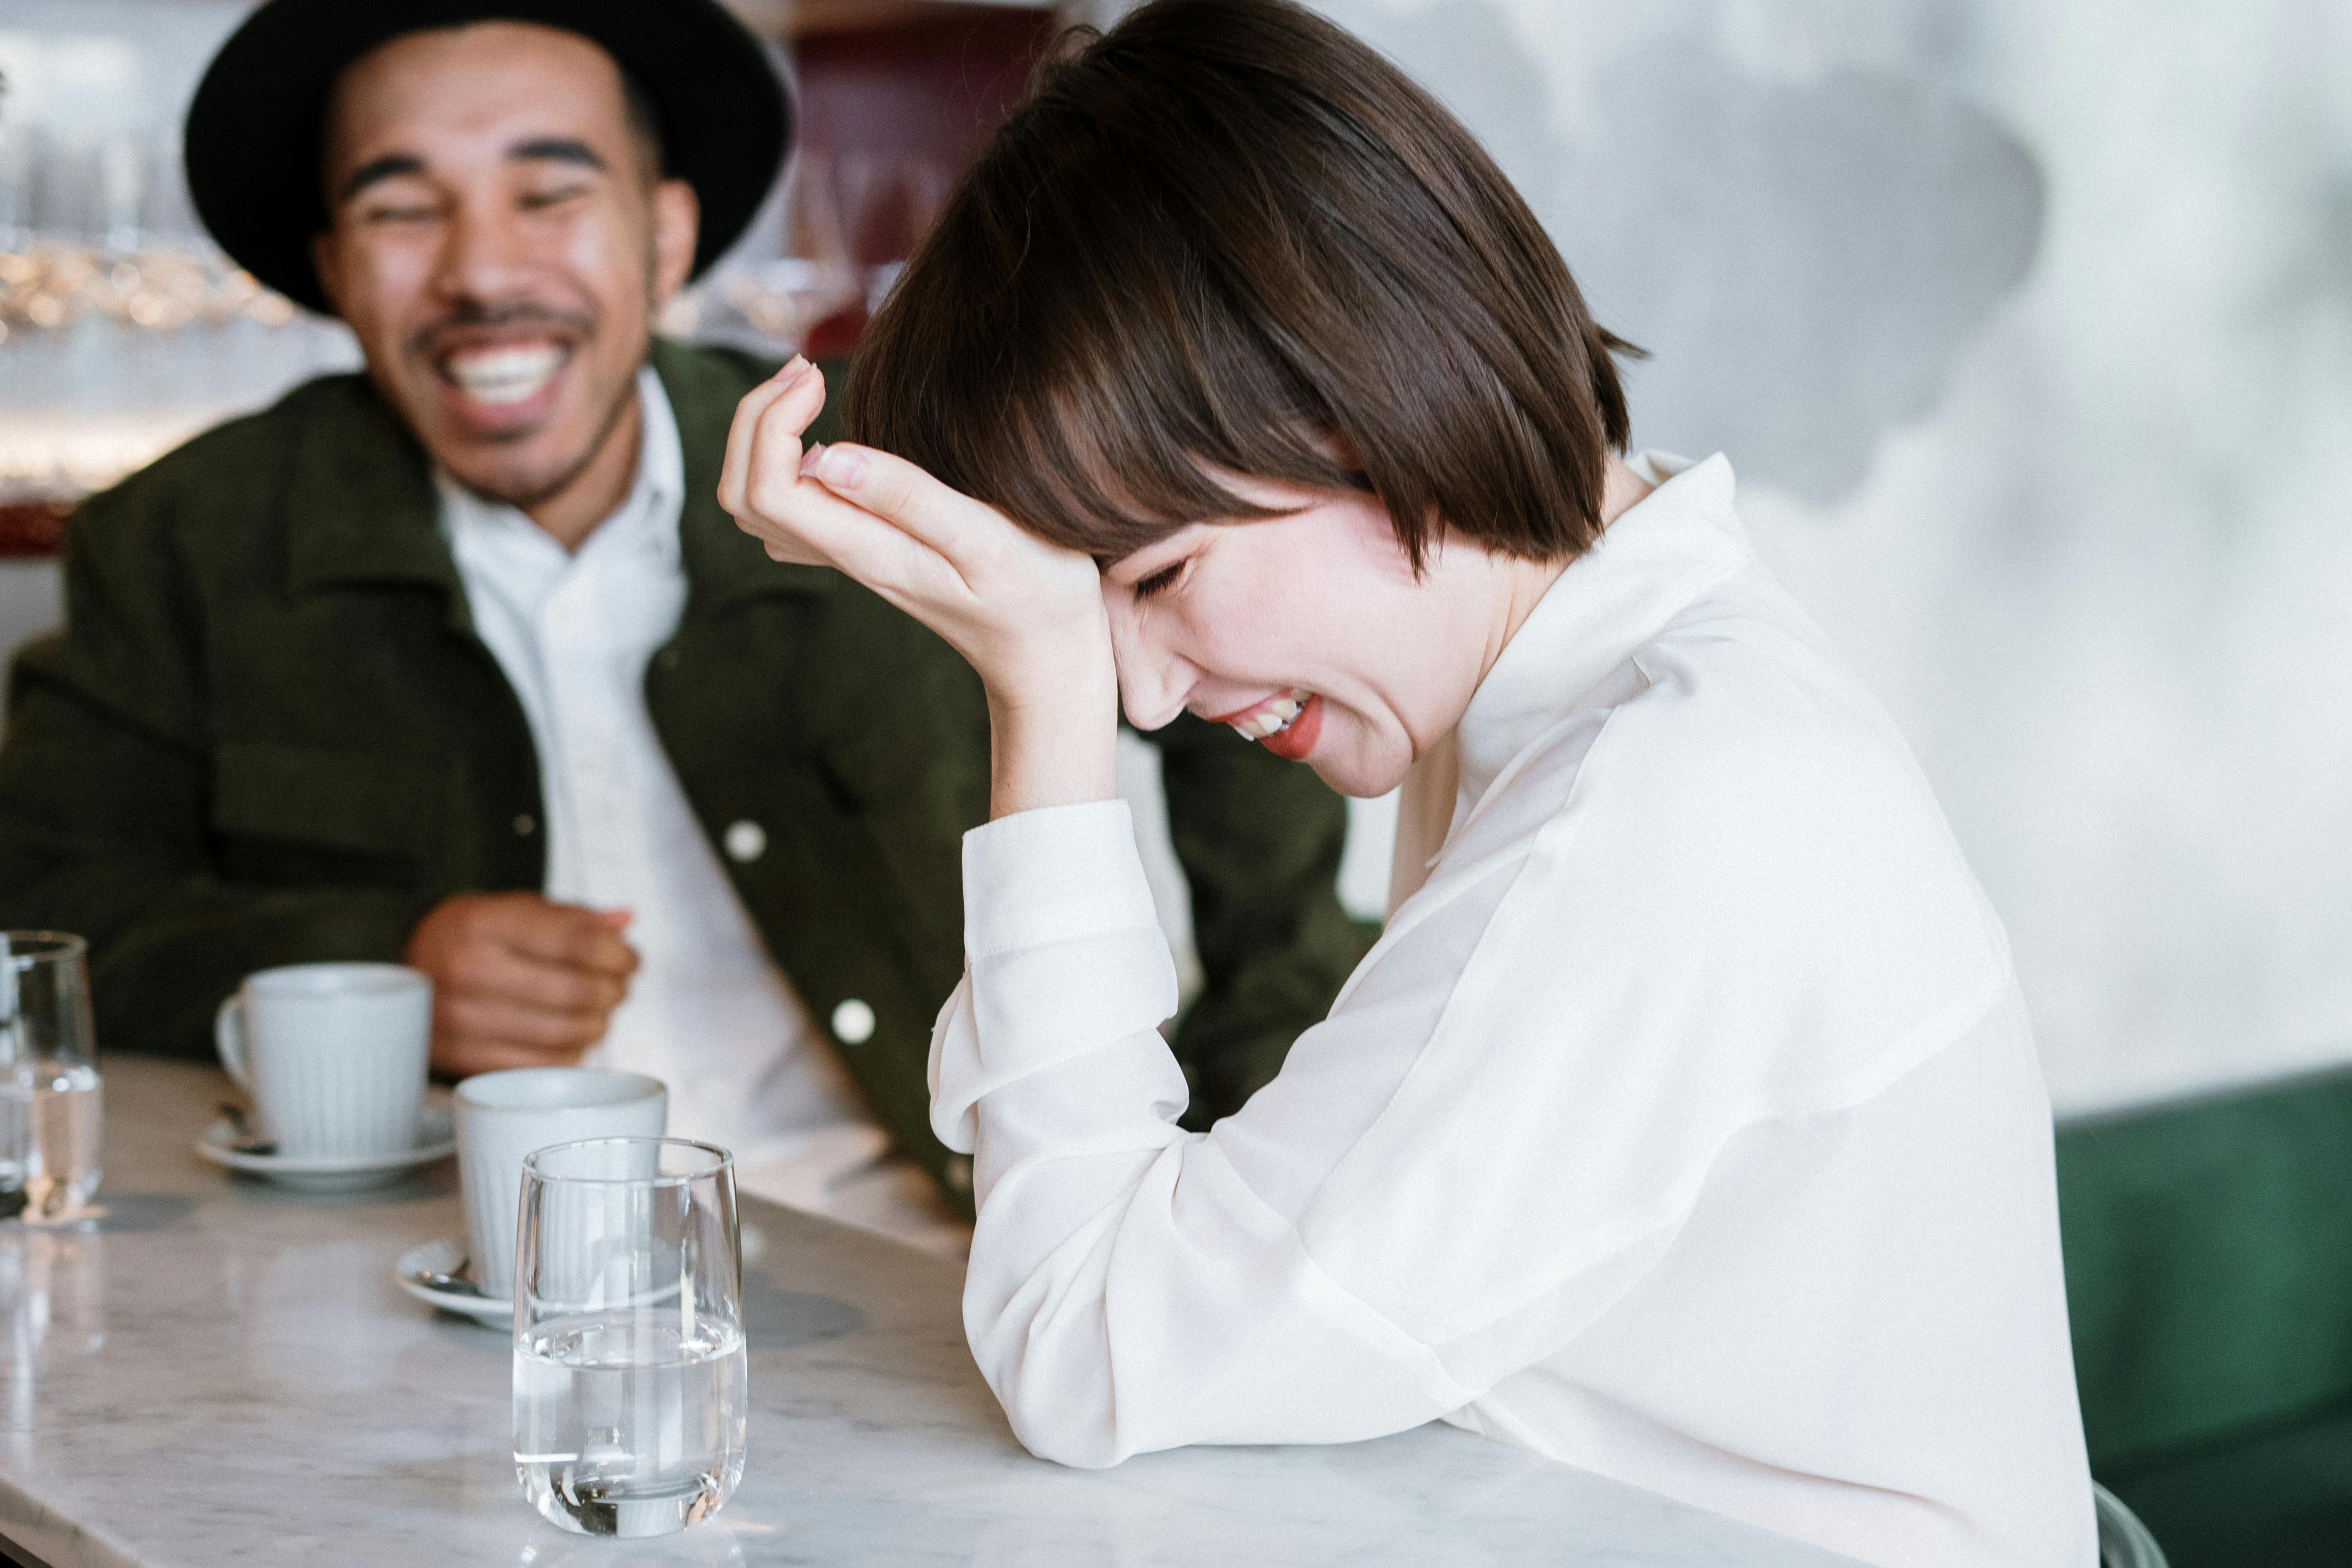 A couple laughing in a restaurant | Source: Pexels